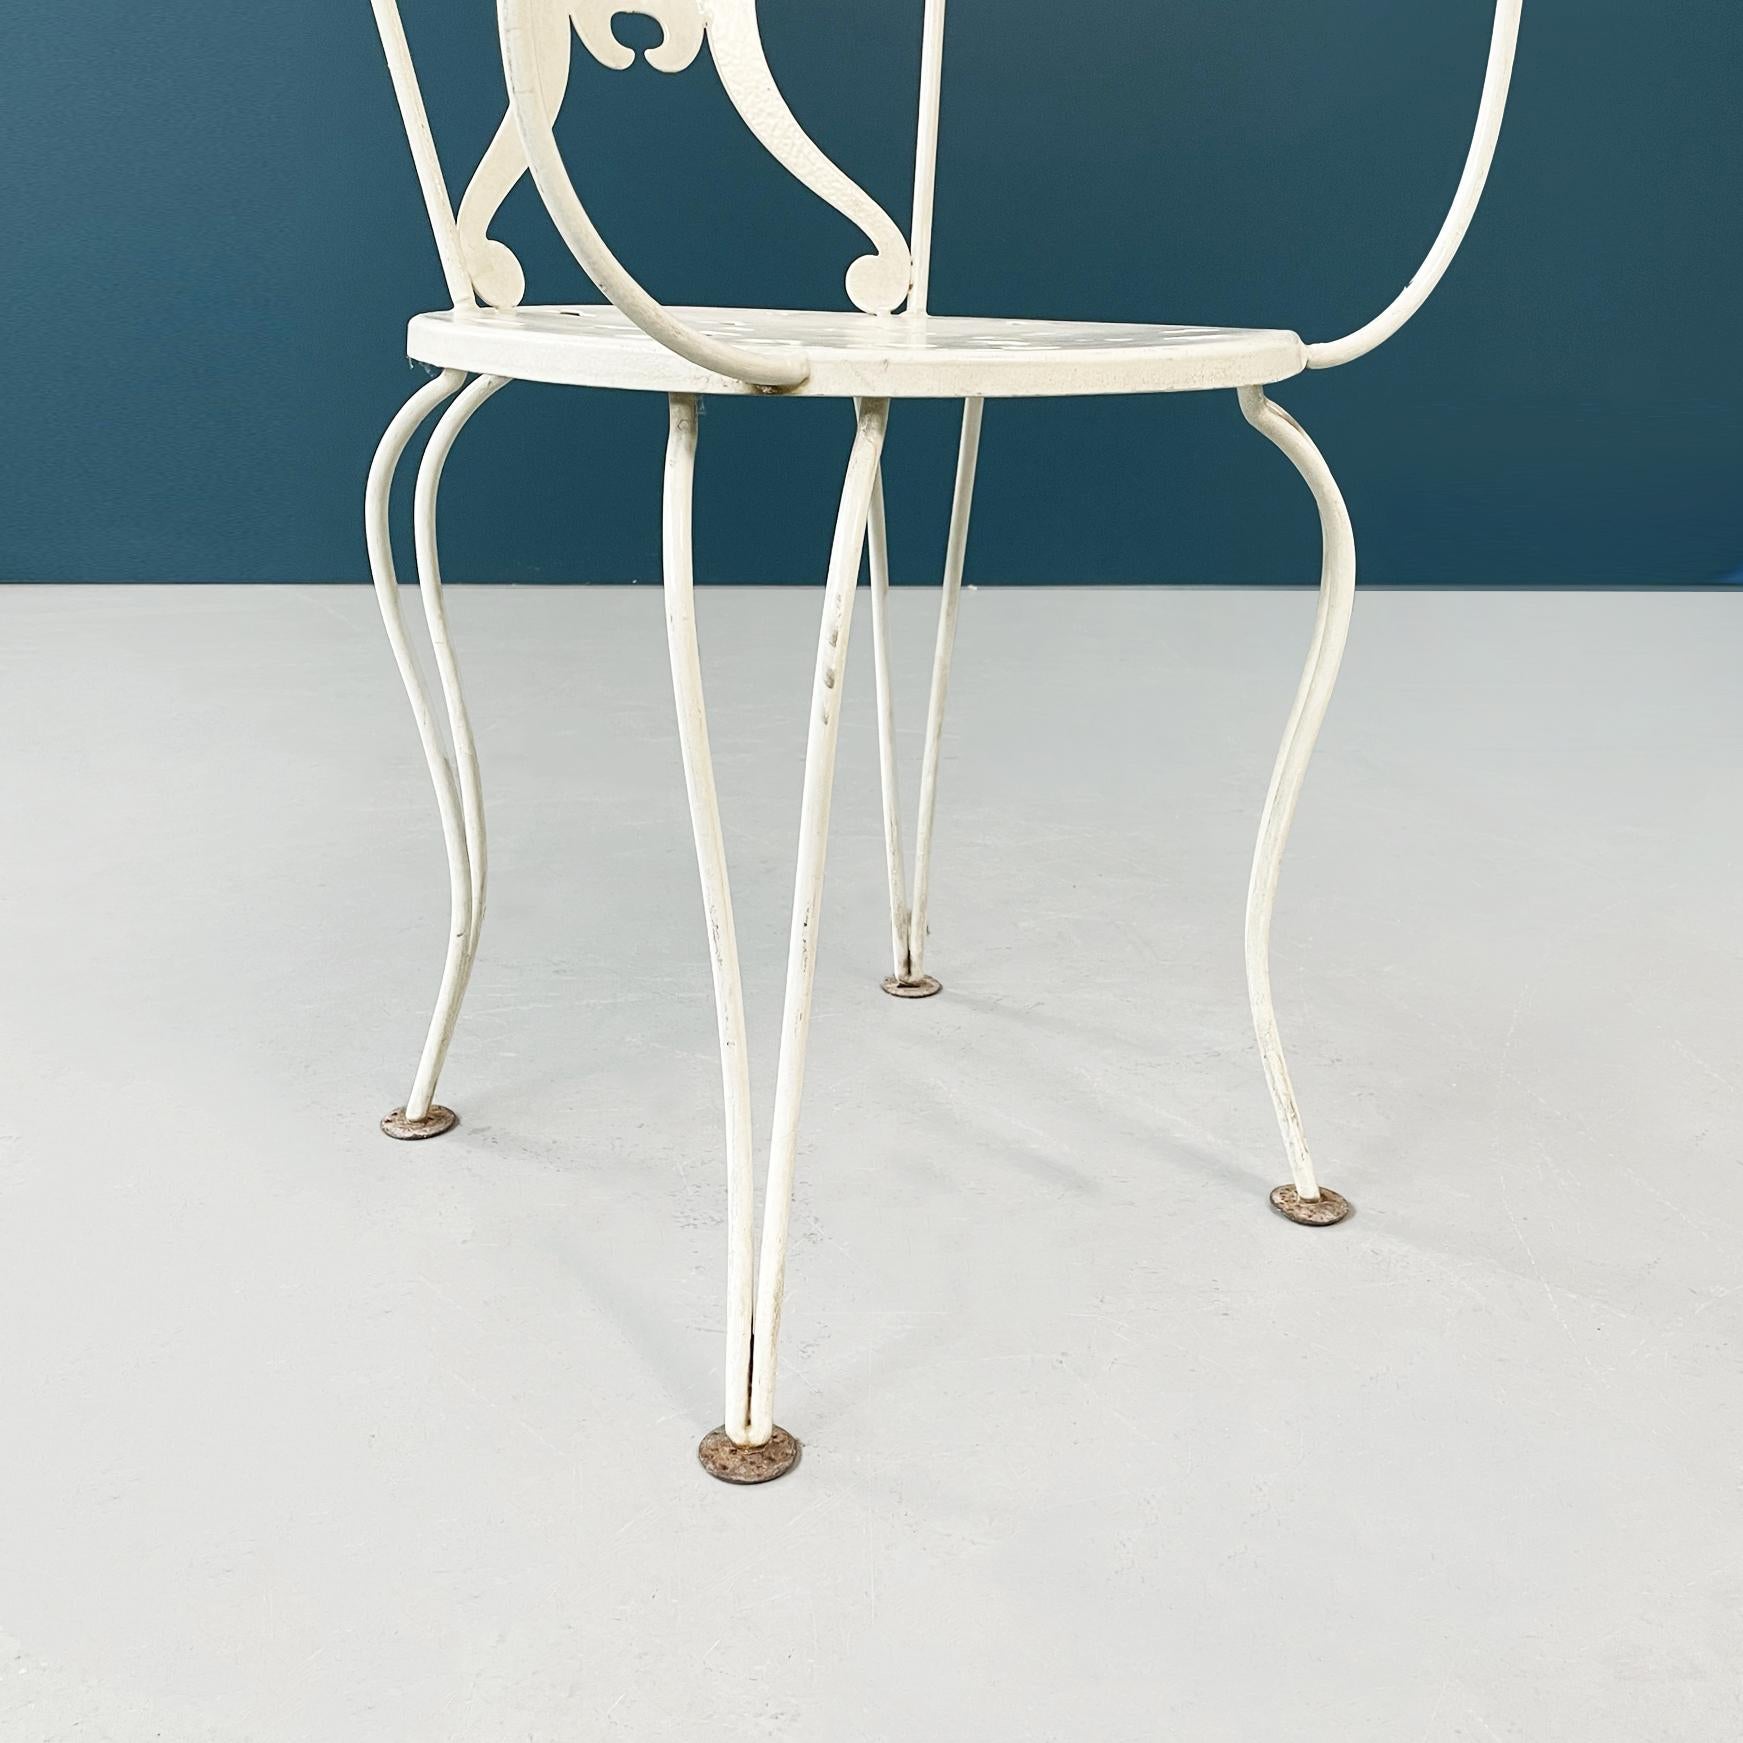 Italian Mid-Century Garden Chairs in White Wrought Iron Finely Worked, 1960s For Sale 11